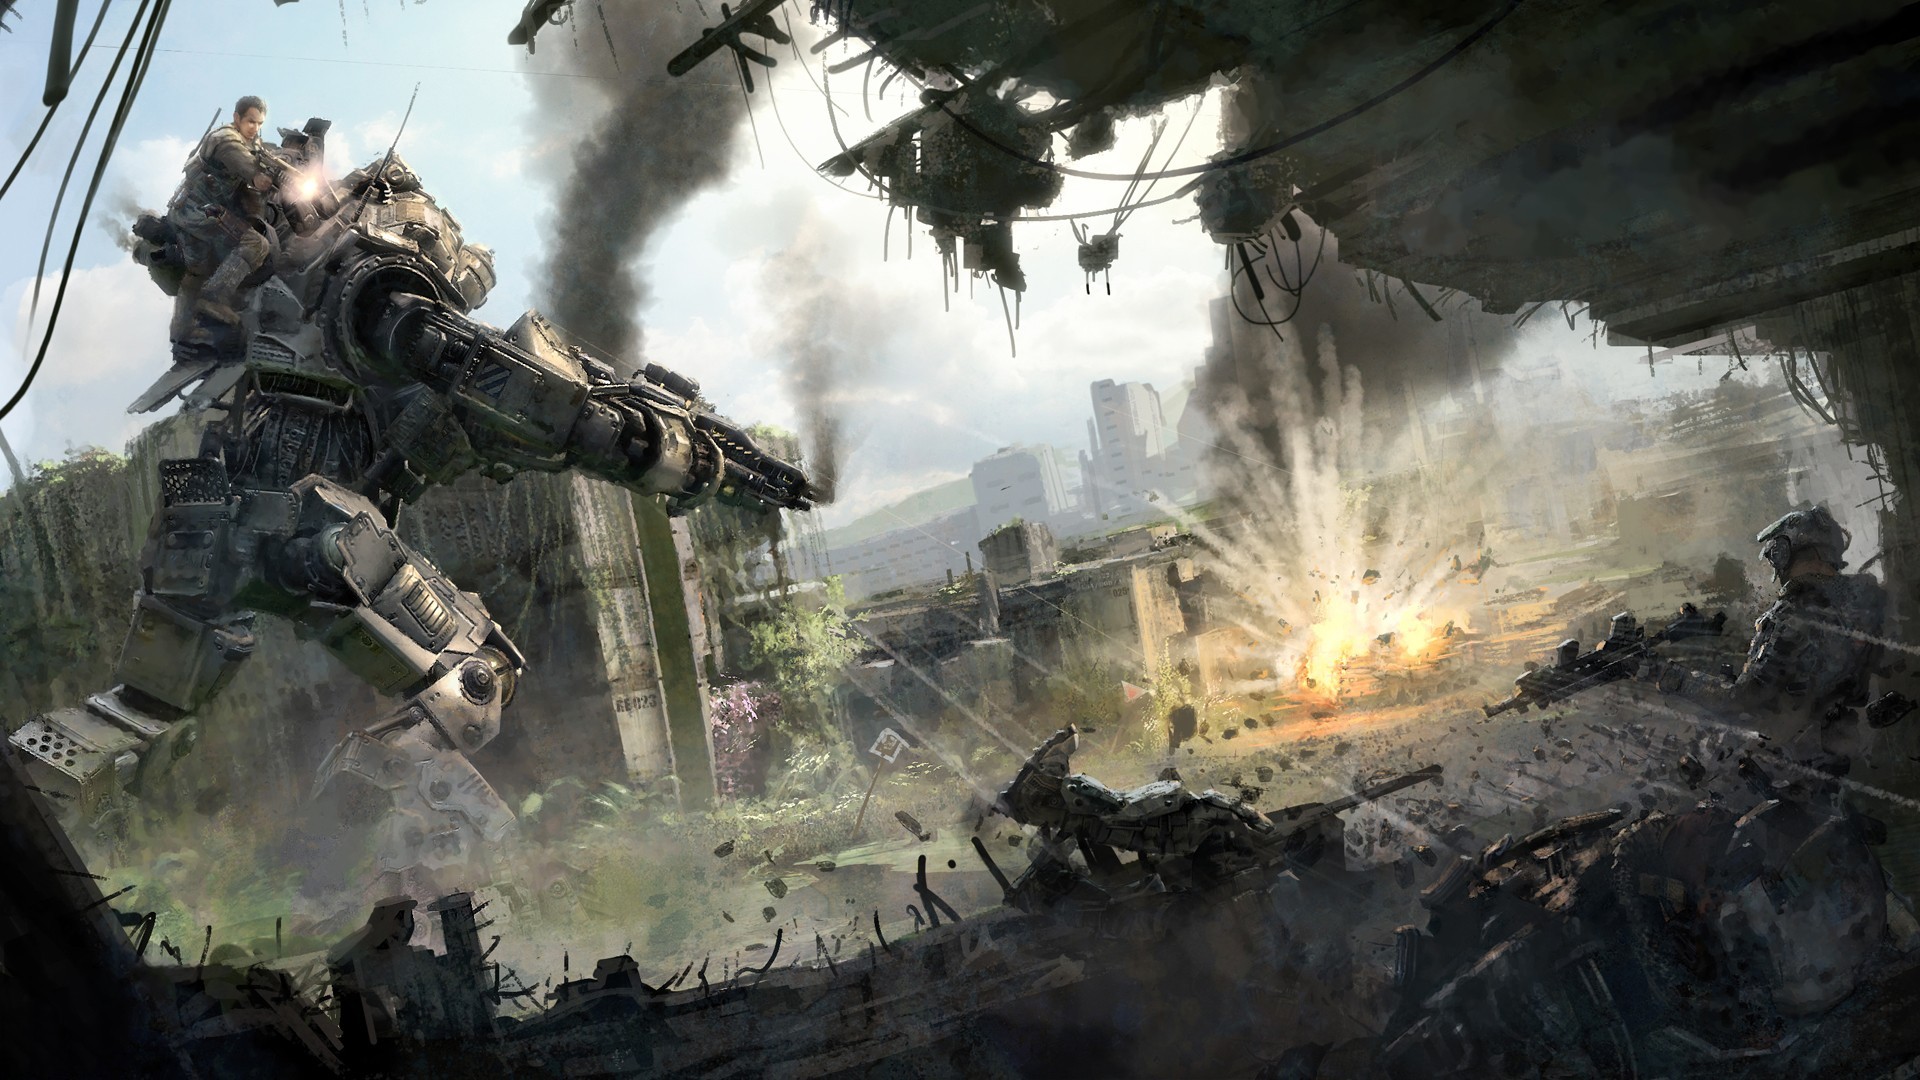 General 1920x1080 Titanfall video games PC gaming war science fiction video game art Respawn Entertainment